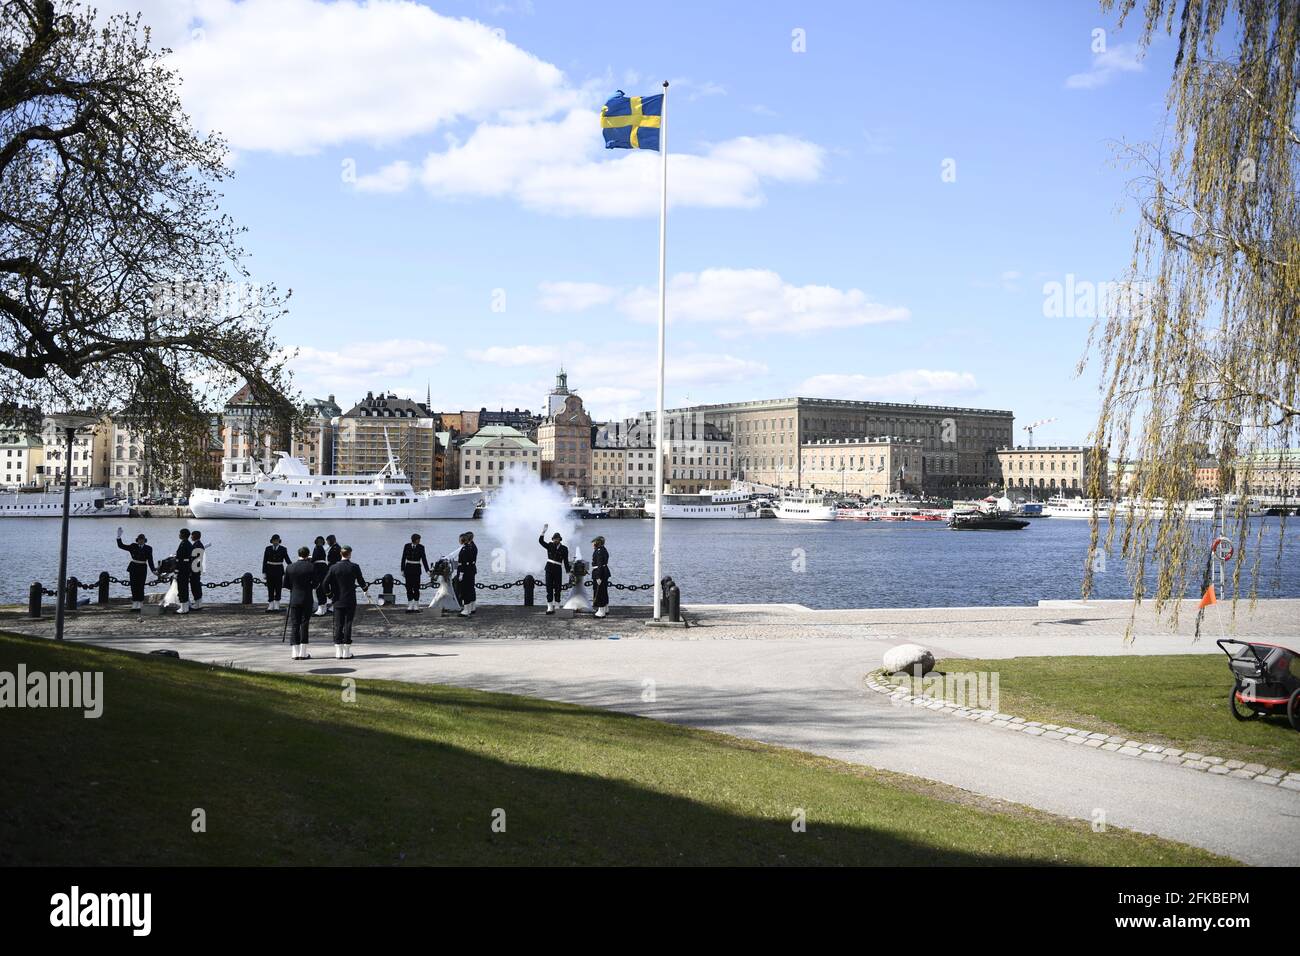 The Swedish Armed Forces' salute to King Carl XVI Gustaf of Sweden on his 75th birthday on Skeppsholmen in Stockholm, Sweden, on April 30, 2021. Photo: Carl-Olof Zimmerman / TT code 12050 Stock Photo